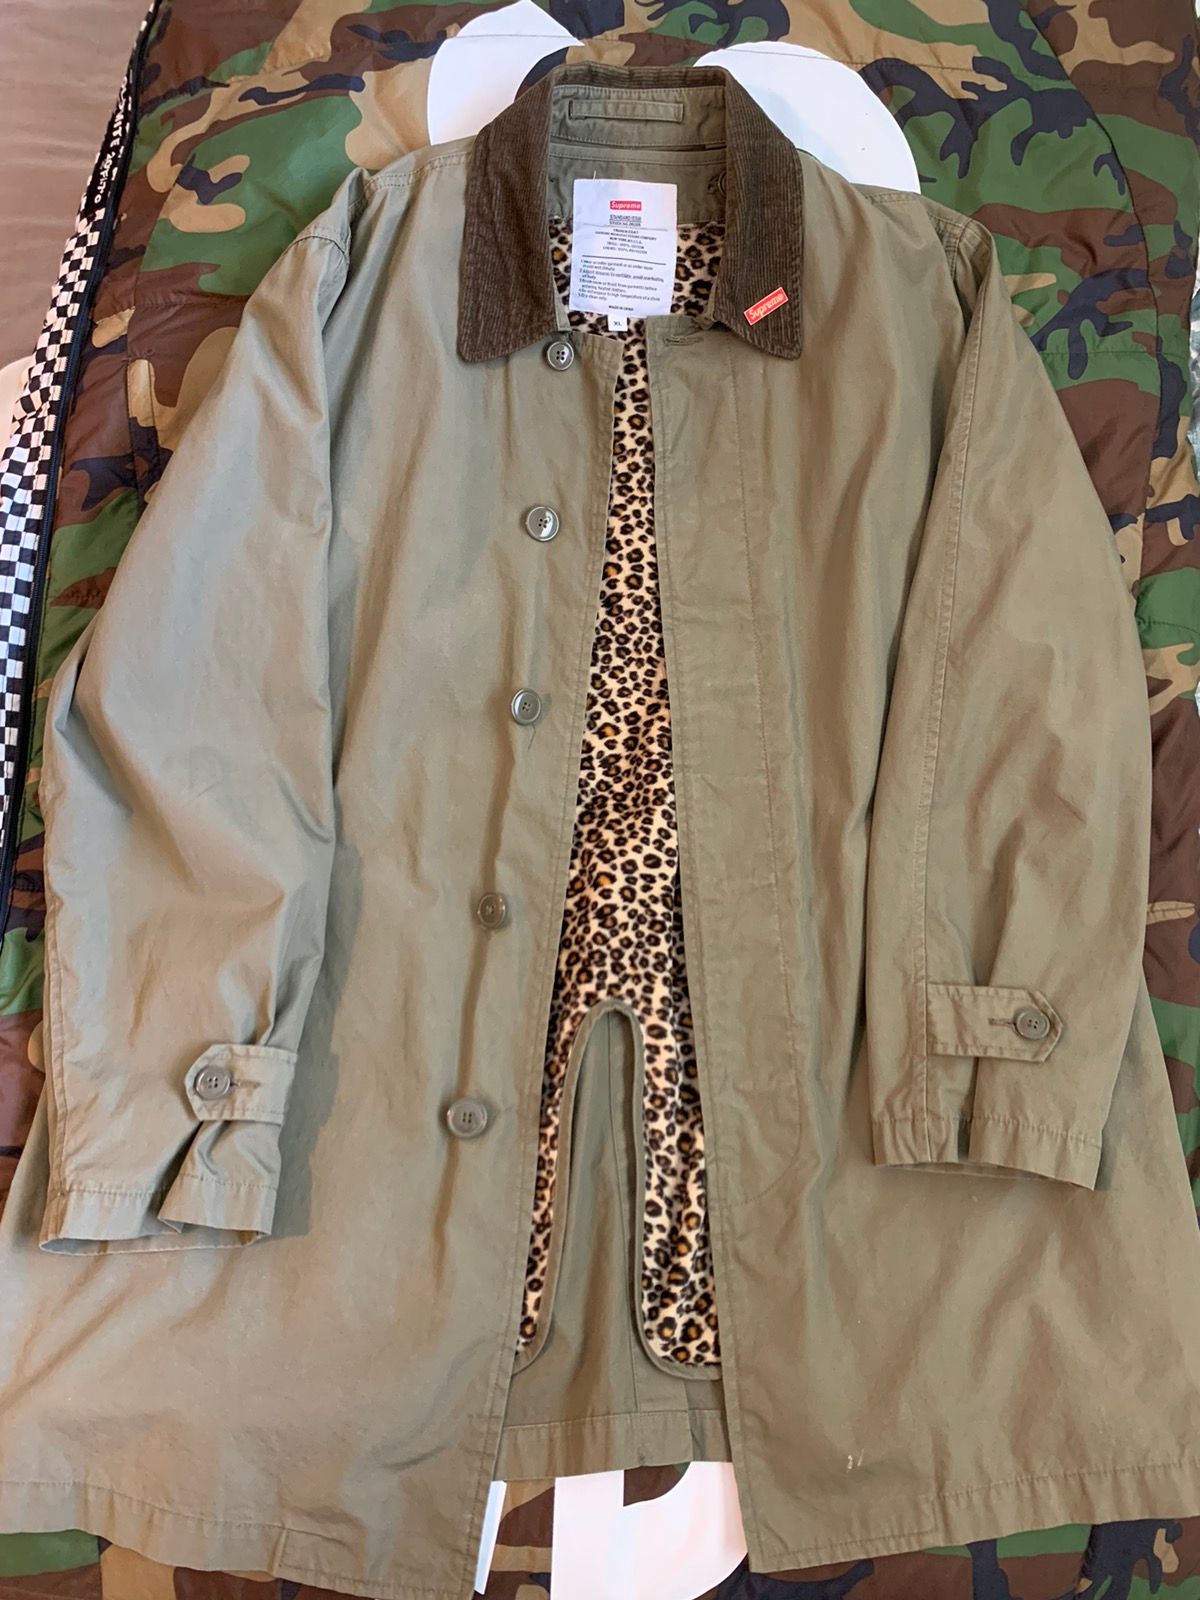 Supreme Leopard Lined Trench Coat XL F/W 2011 | Grailed